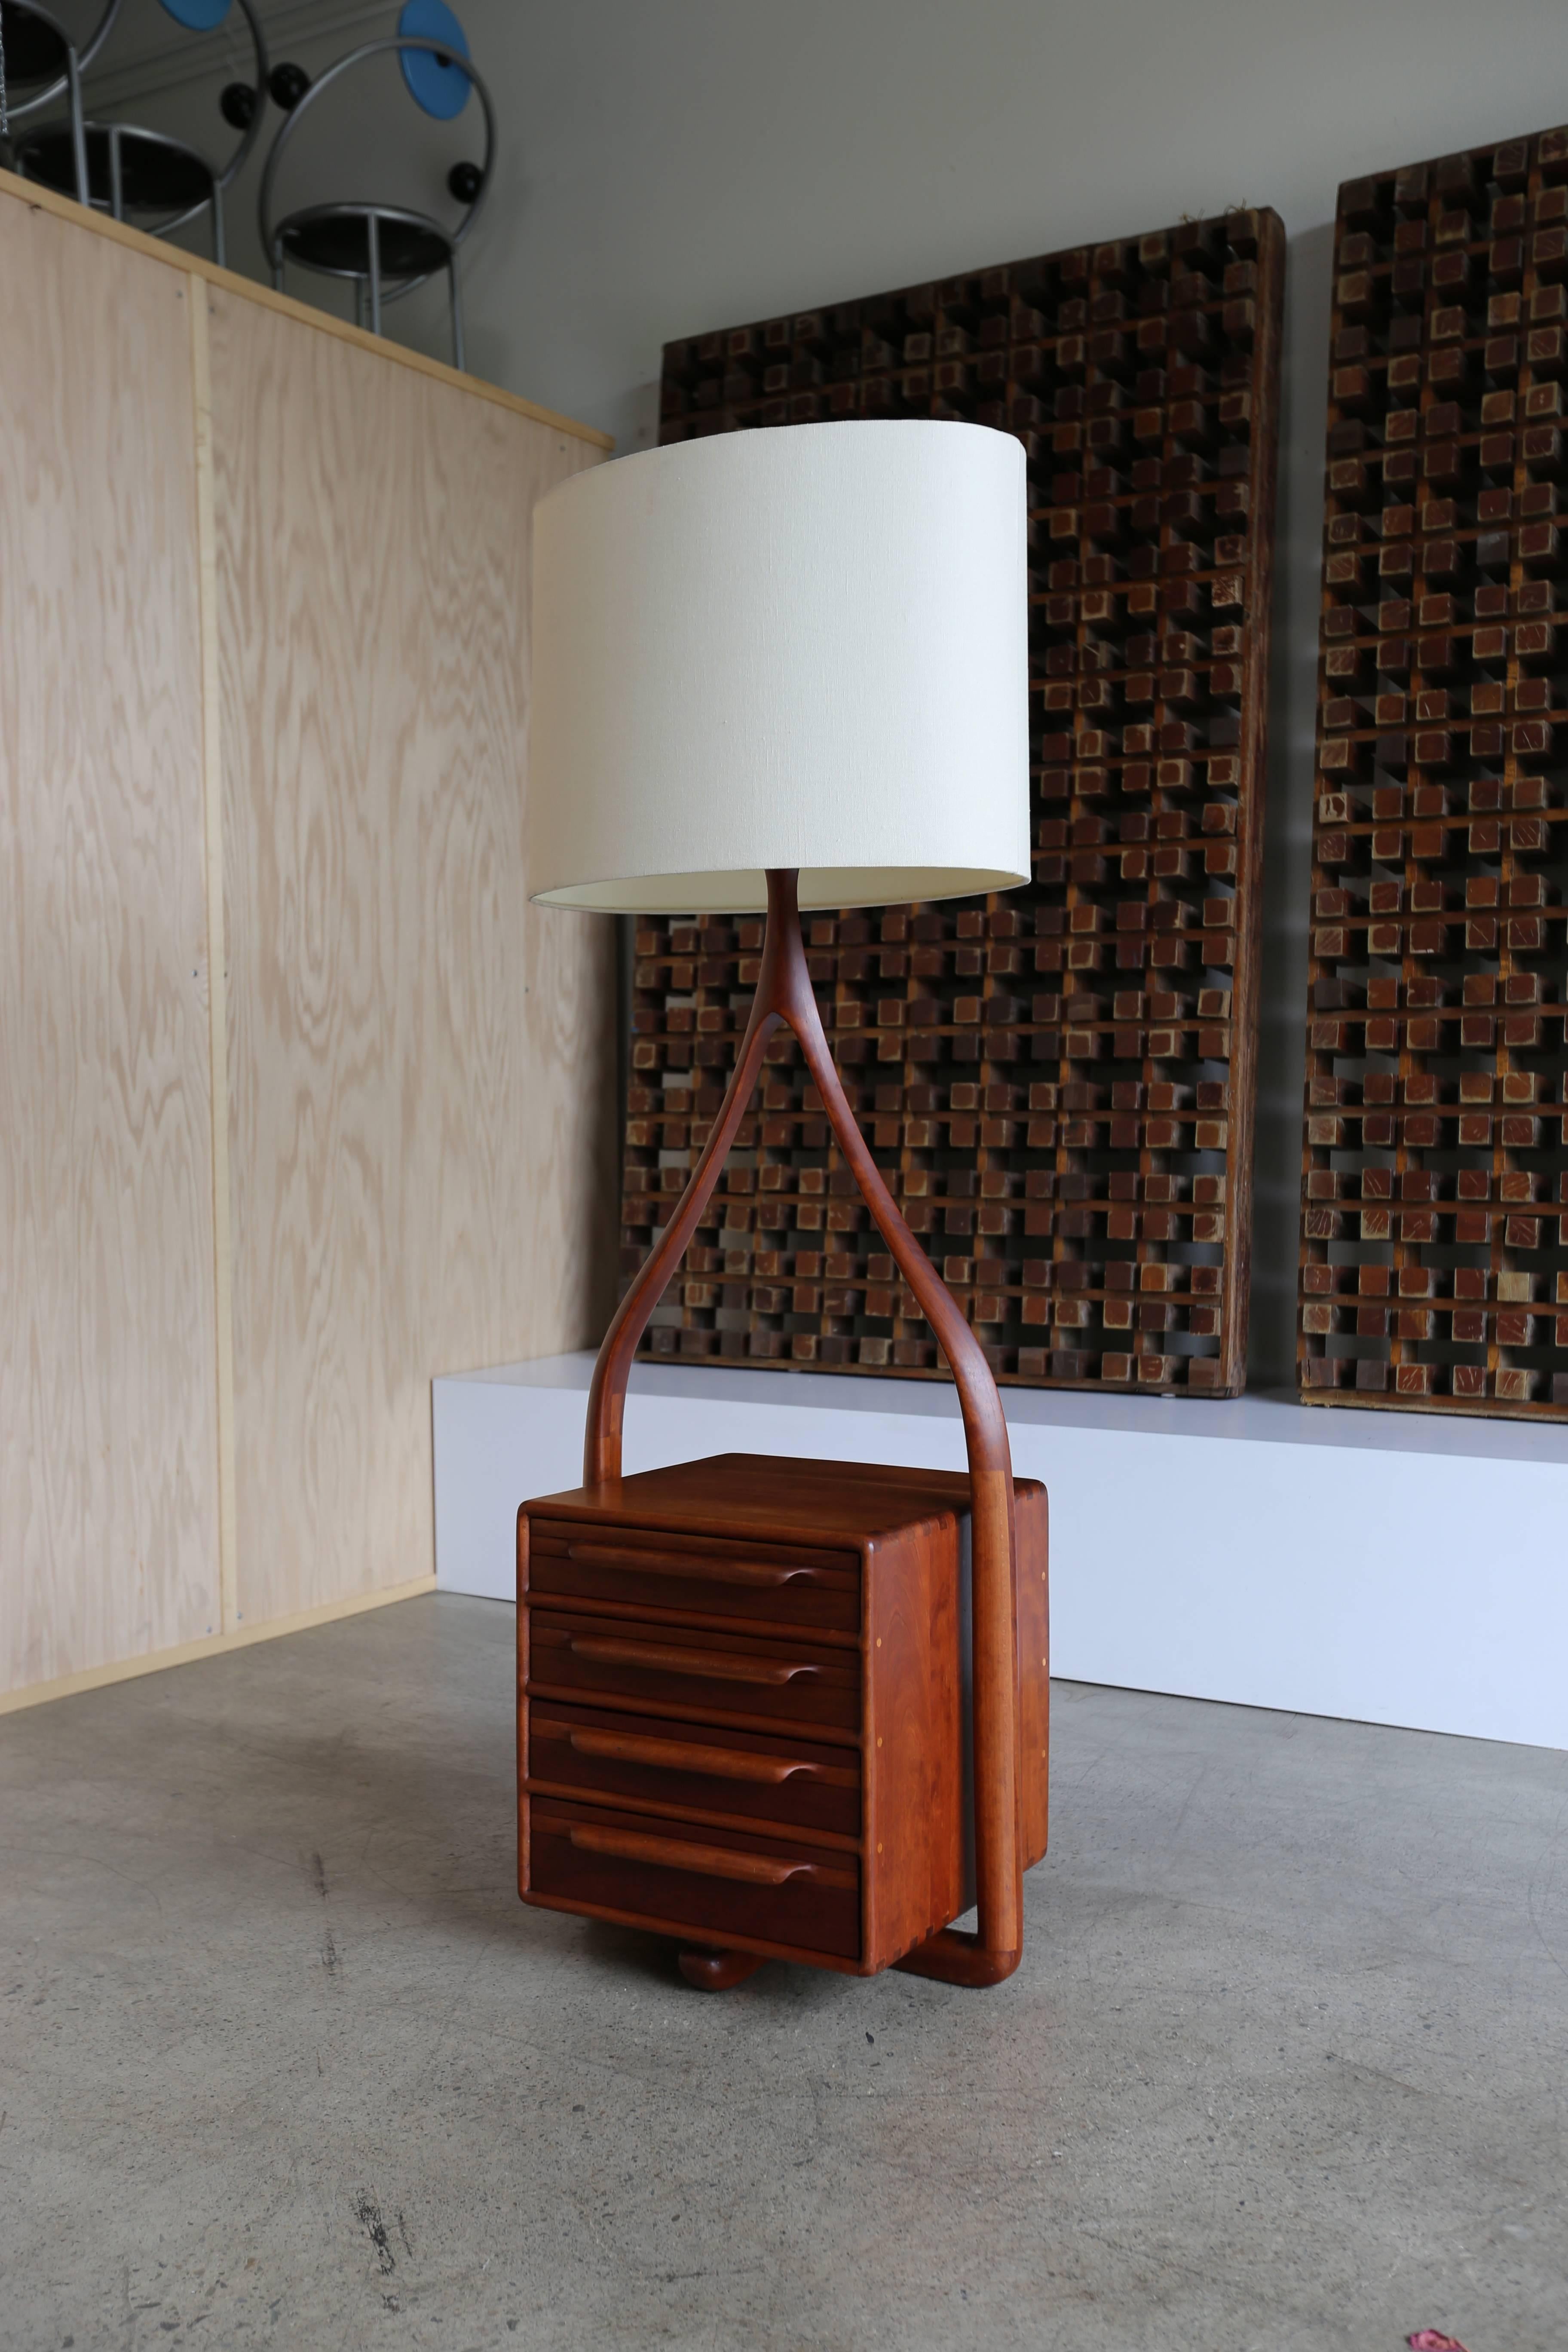 Handcrafted floor lamp by Tom Tramel, 1970s. From the estate of Tom Tramel. The drawers pass through to both sides of the lamp base. Sculptural 